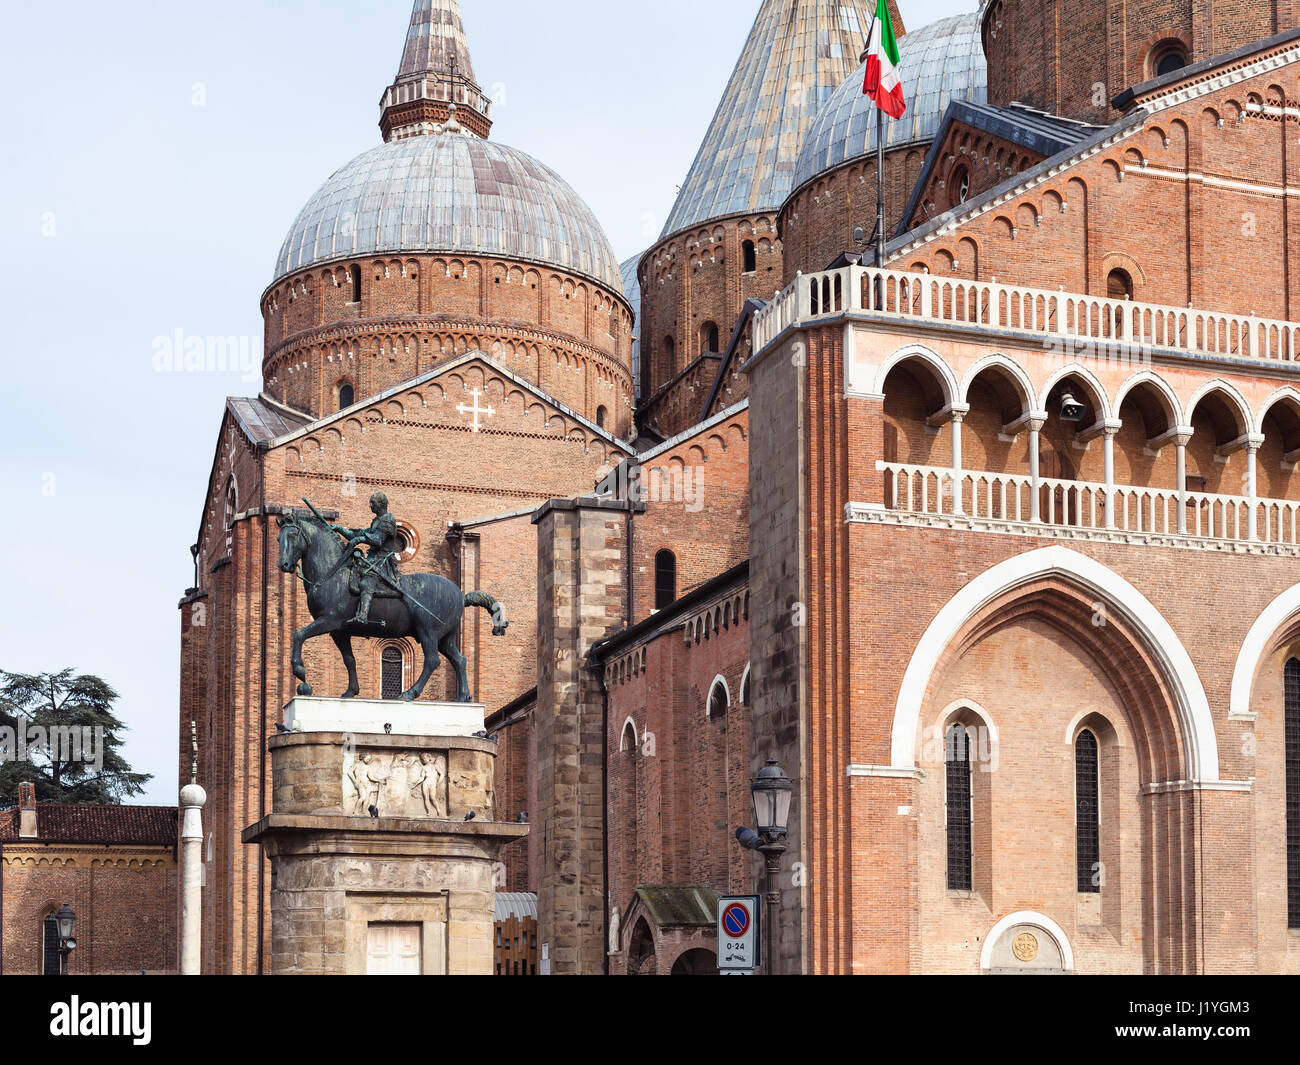 travel to Italy - view of The Equestrian Statue of Gattamelata by Donatello and Basilica of Saint Anthony of Padua on piazza del Santo in Padua city Stock Photo